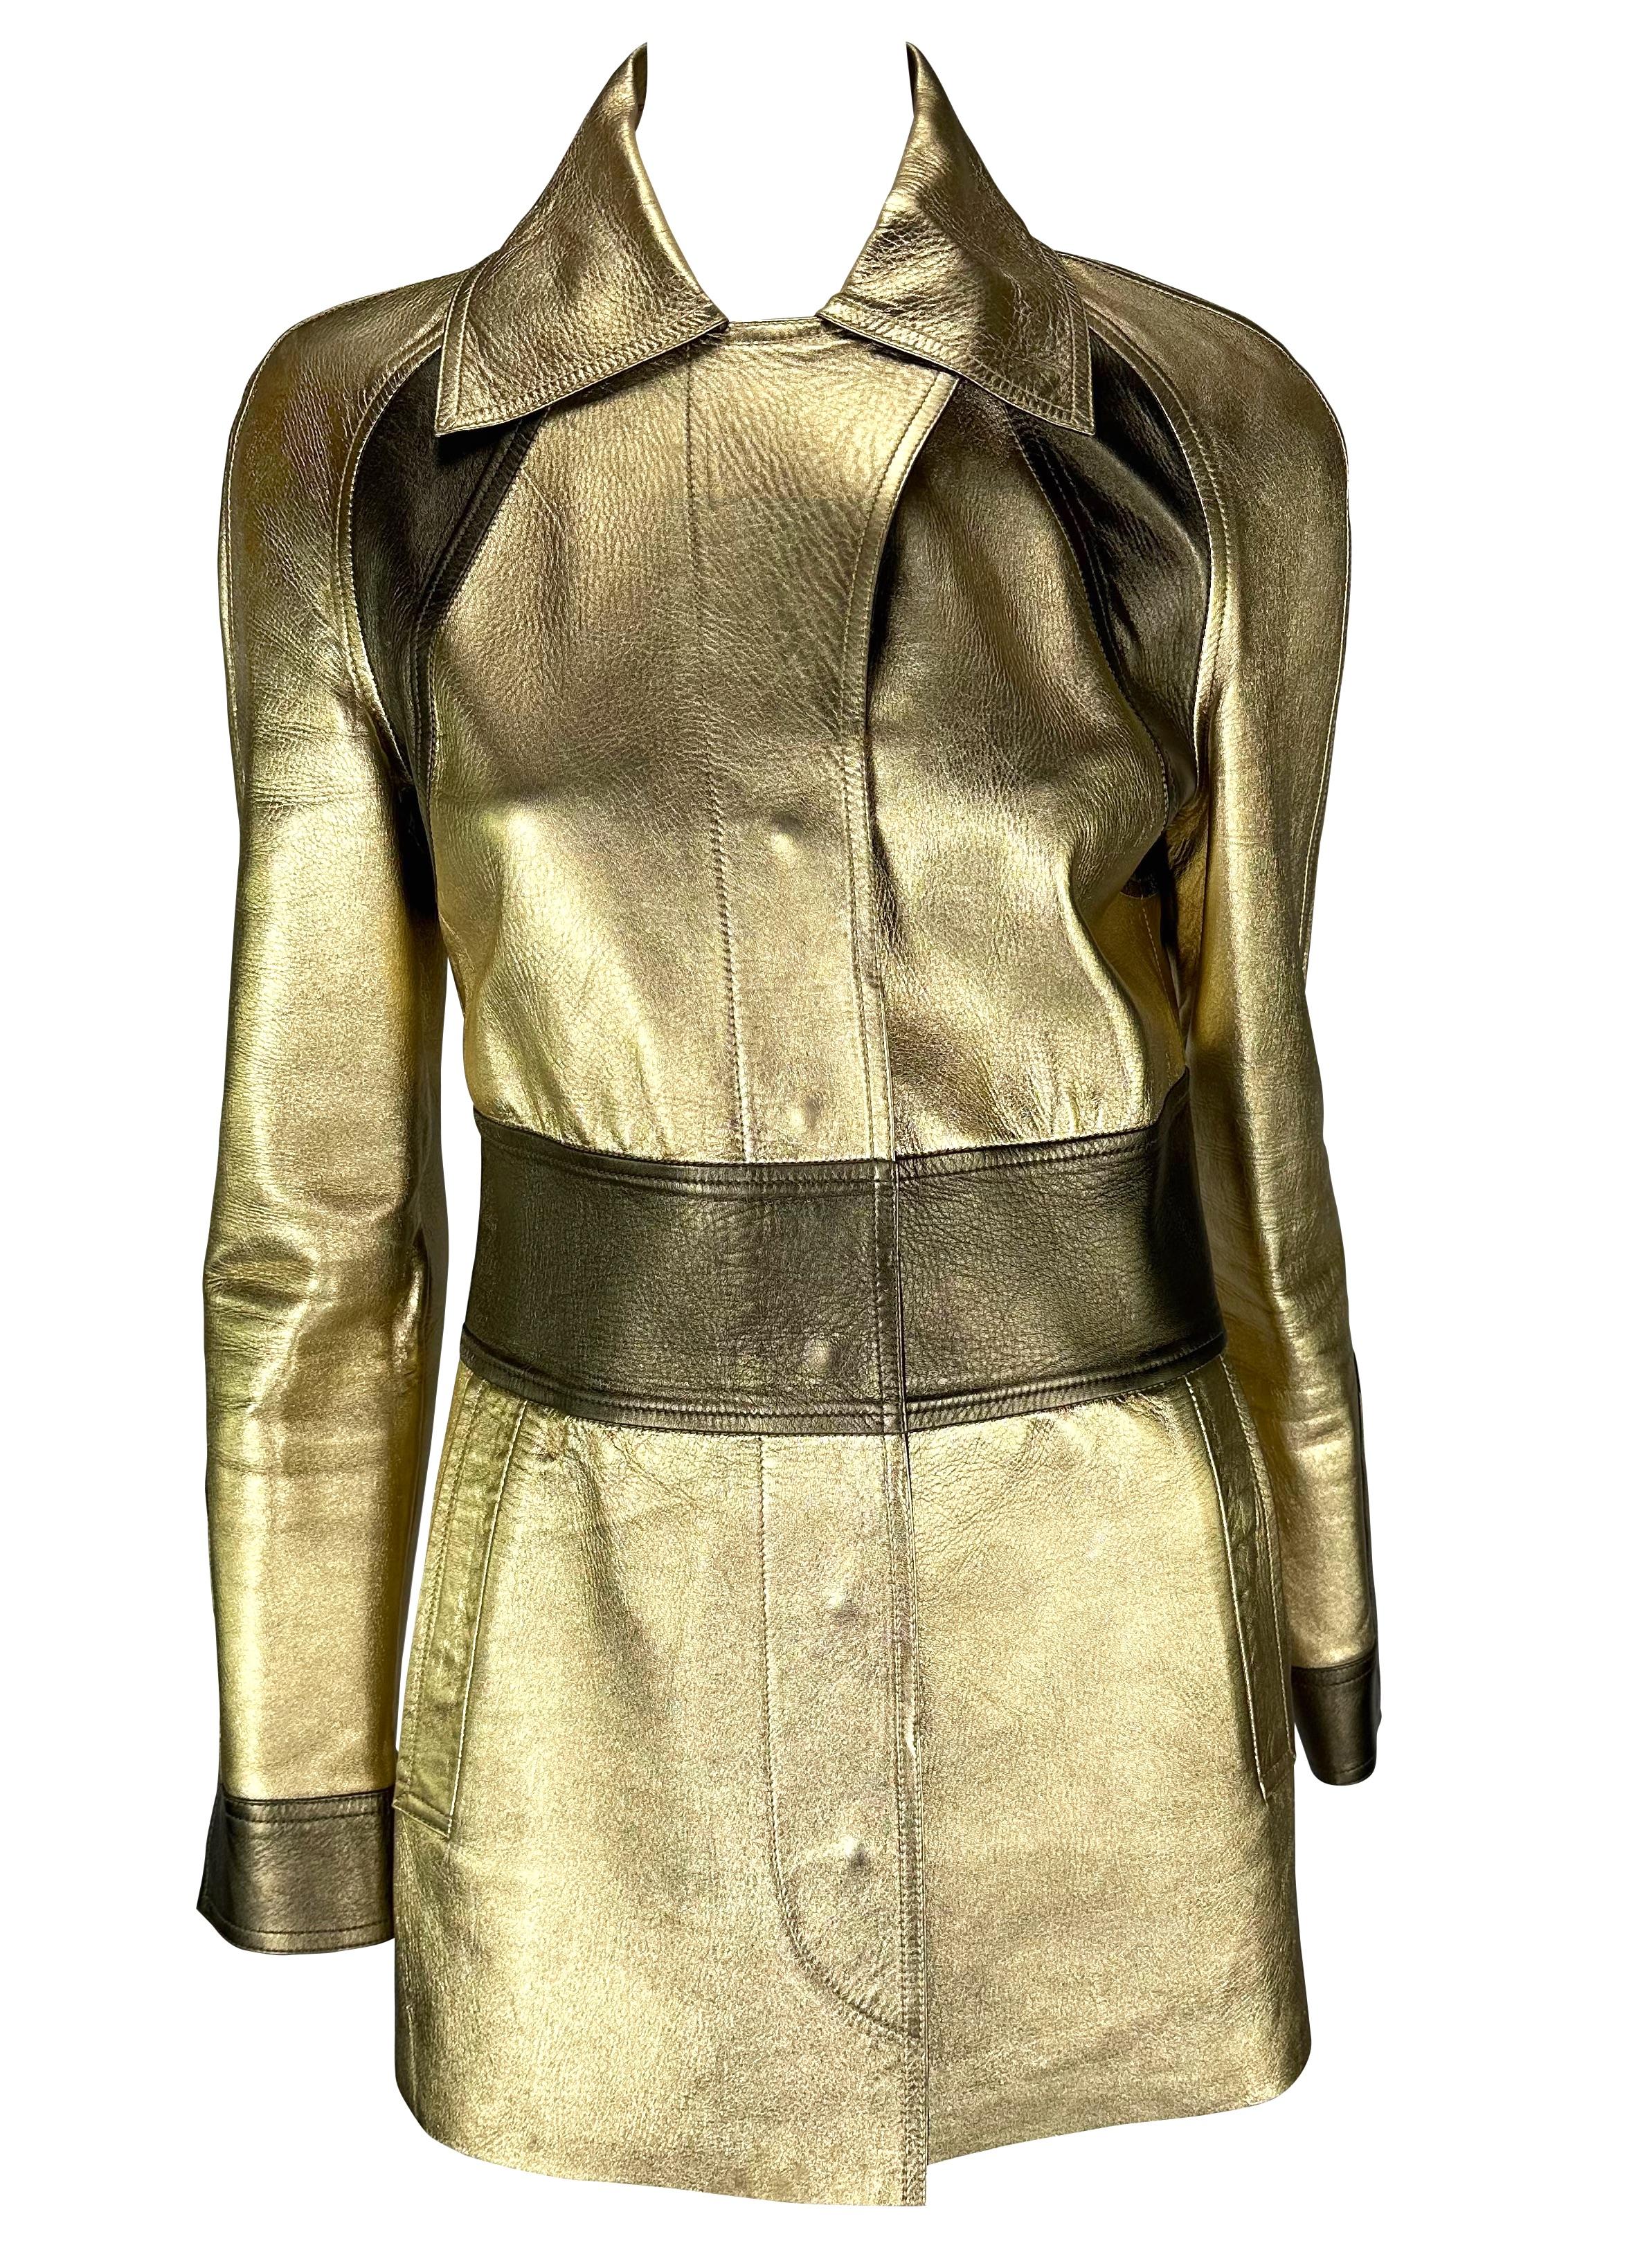 F/W 2000 Gucci by Tom Ford Gold Metallic Two-Tone Leather Jacket For Sale 2